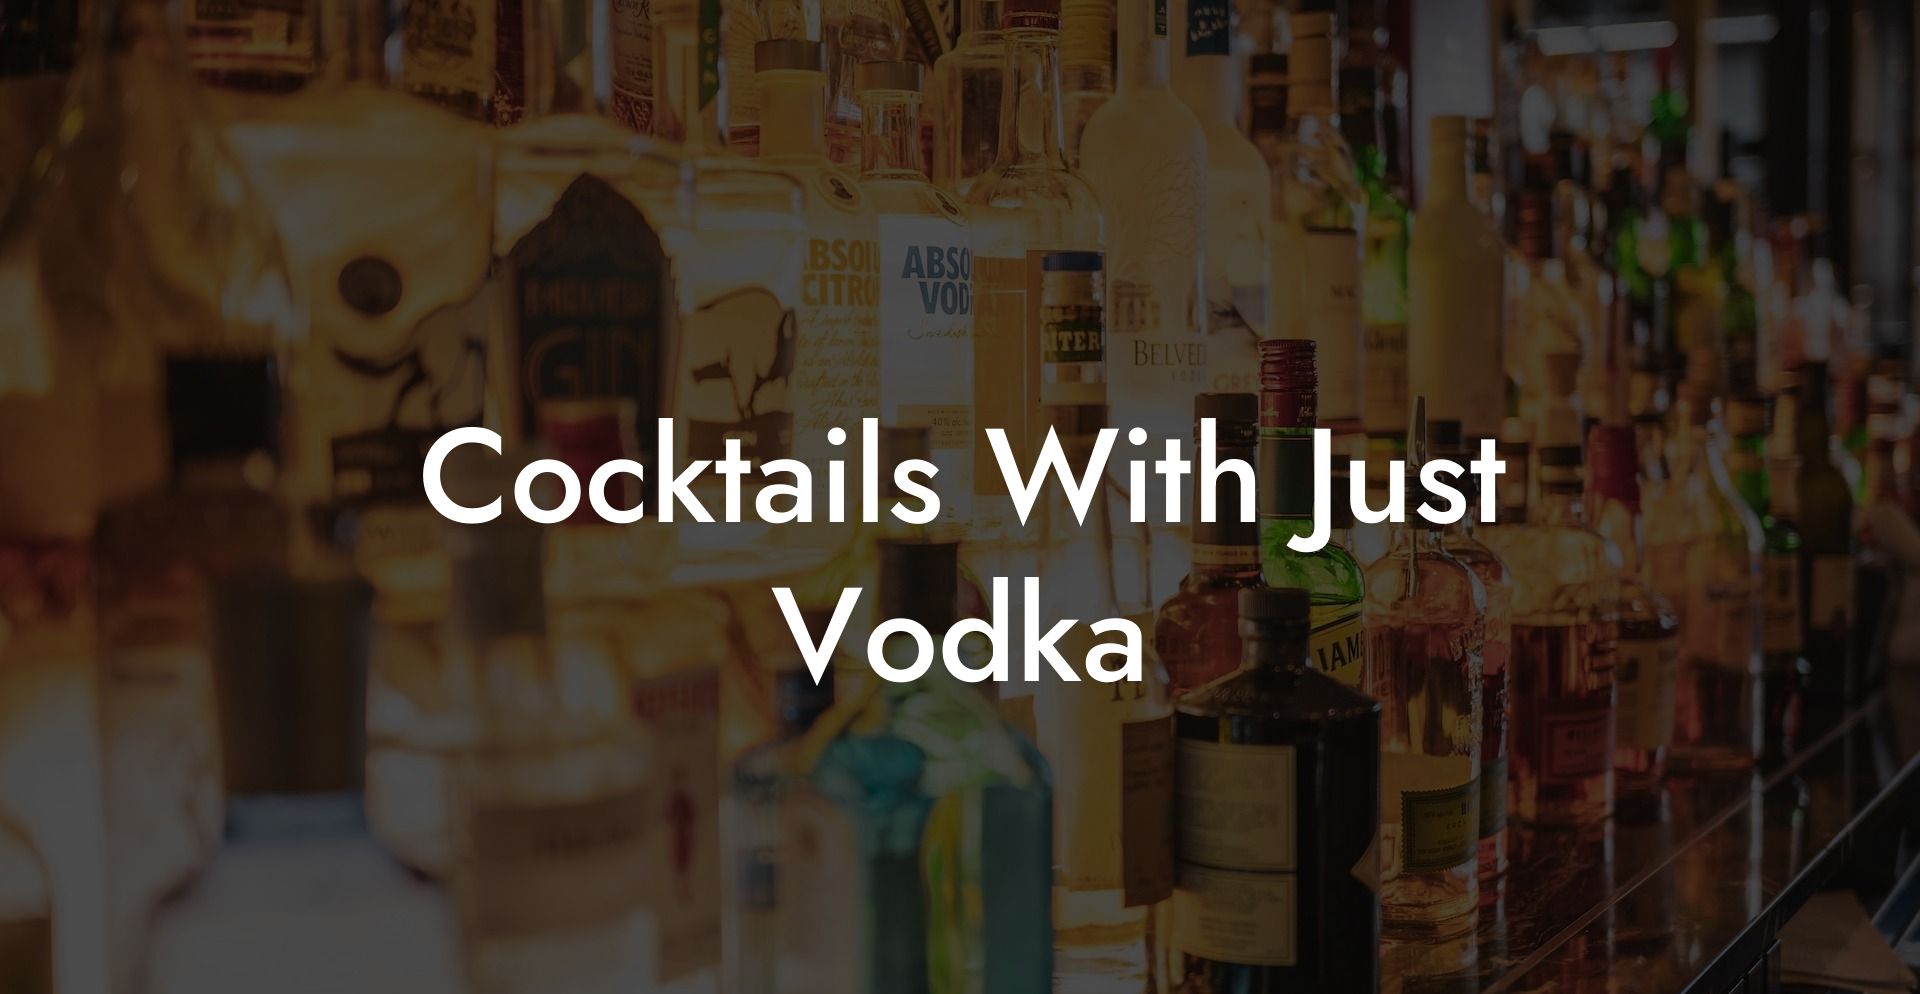 Cocktails With Just Vodka